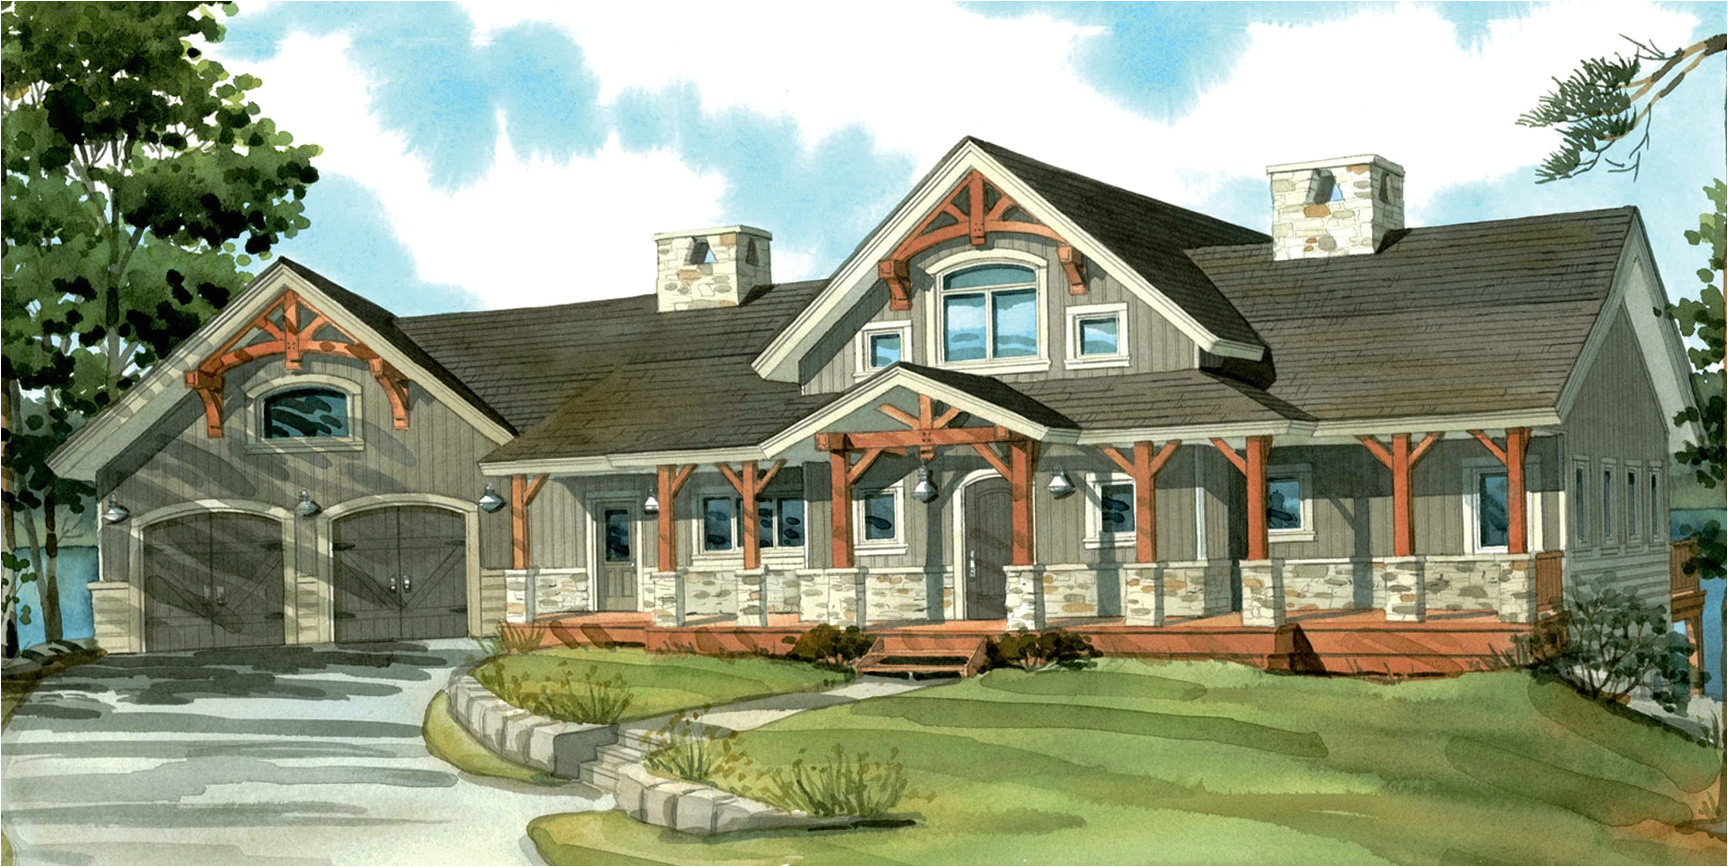 12857 ranch style house plans with basement and wrap around porch